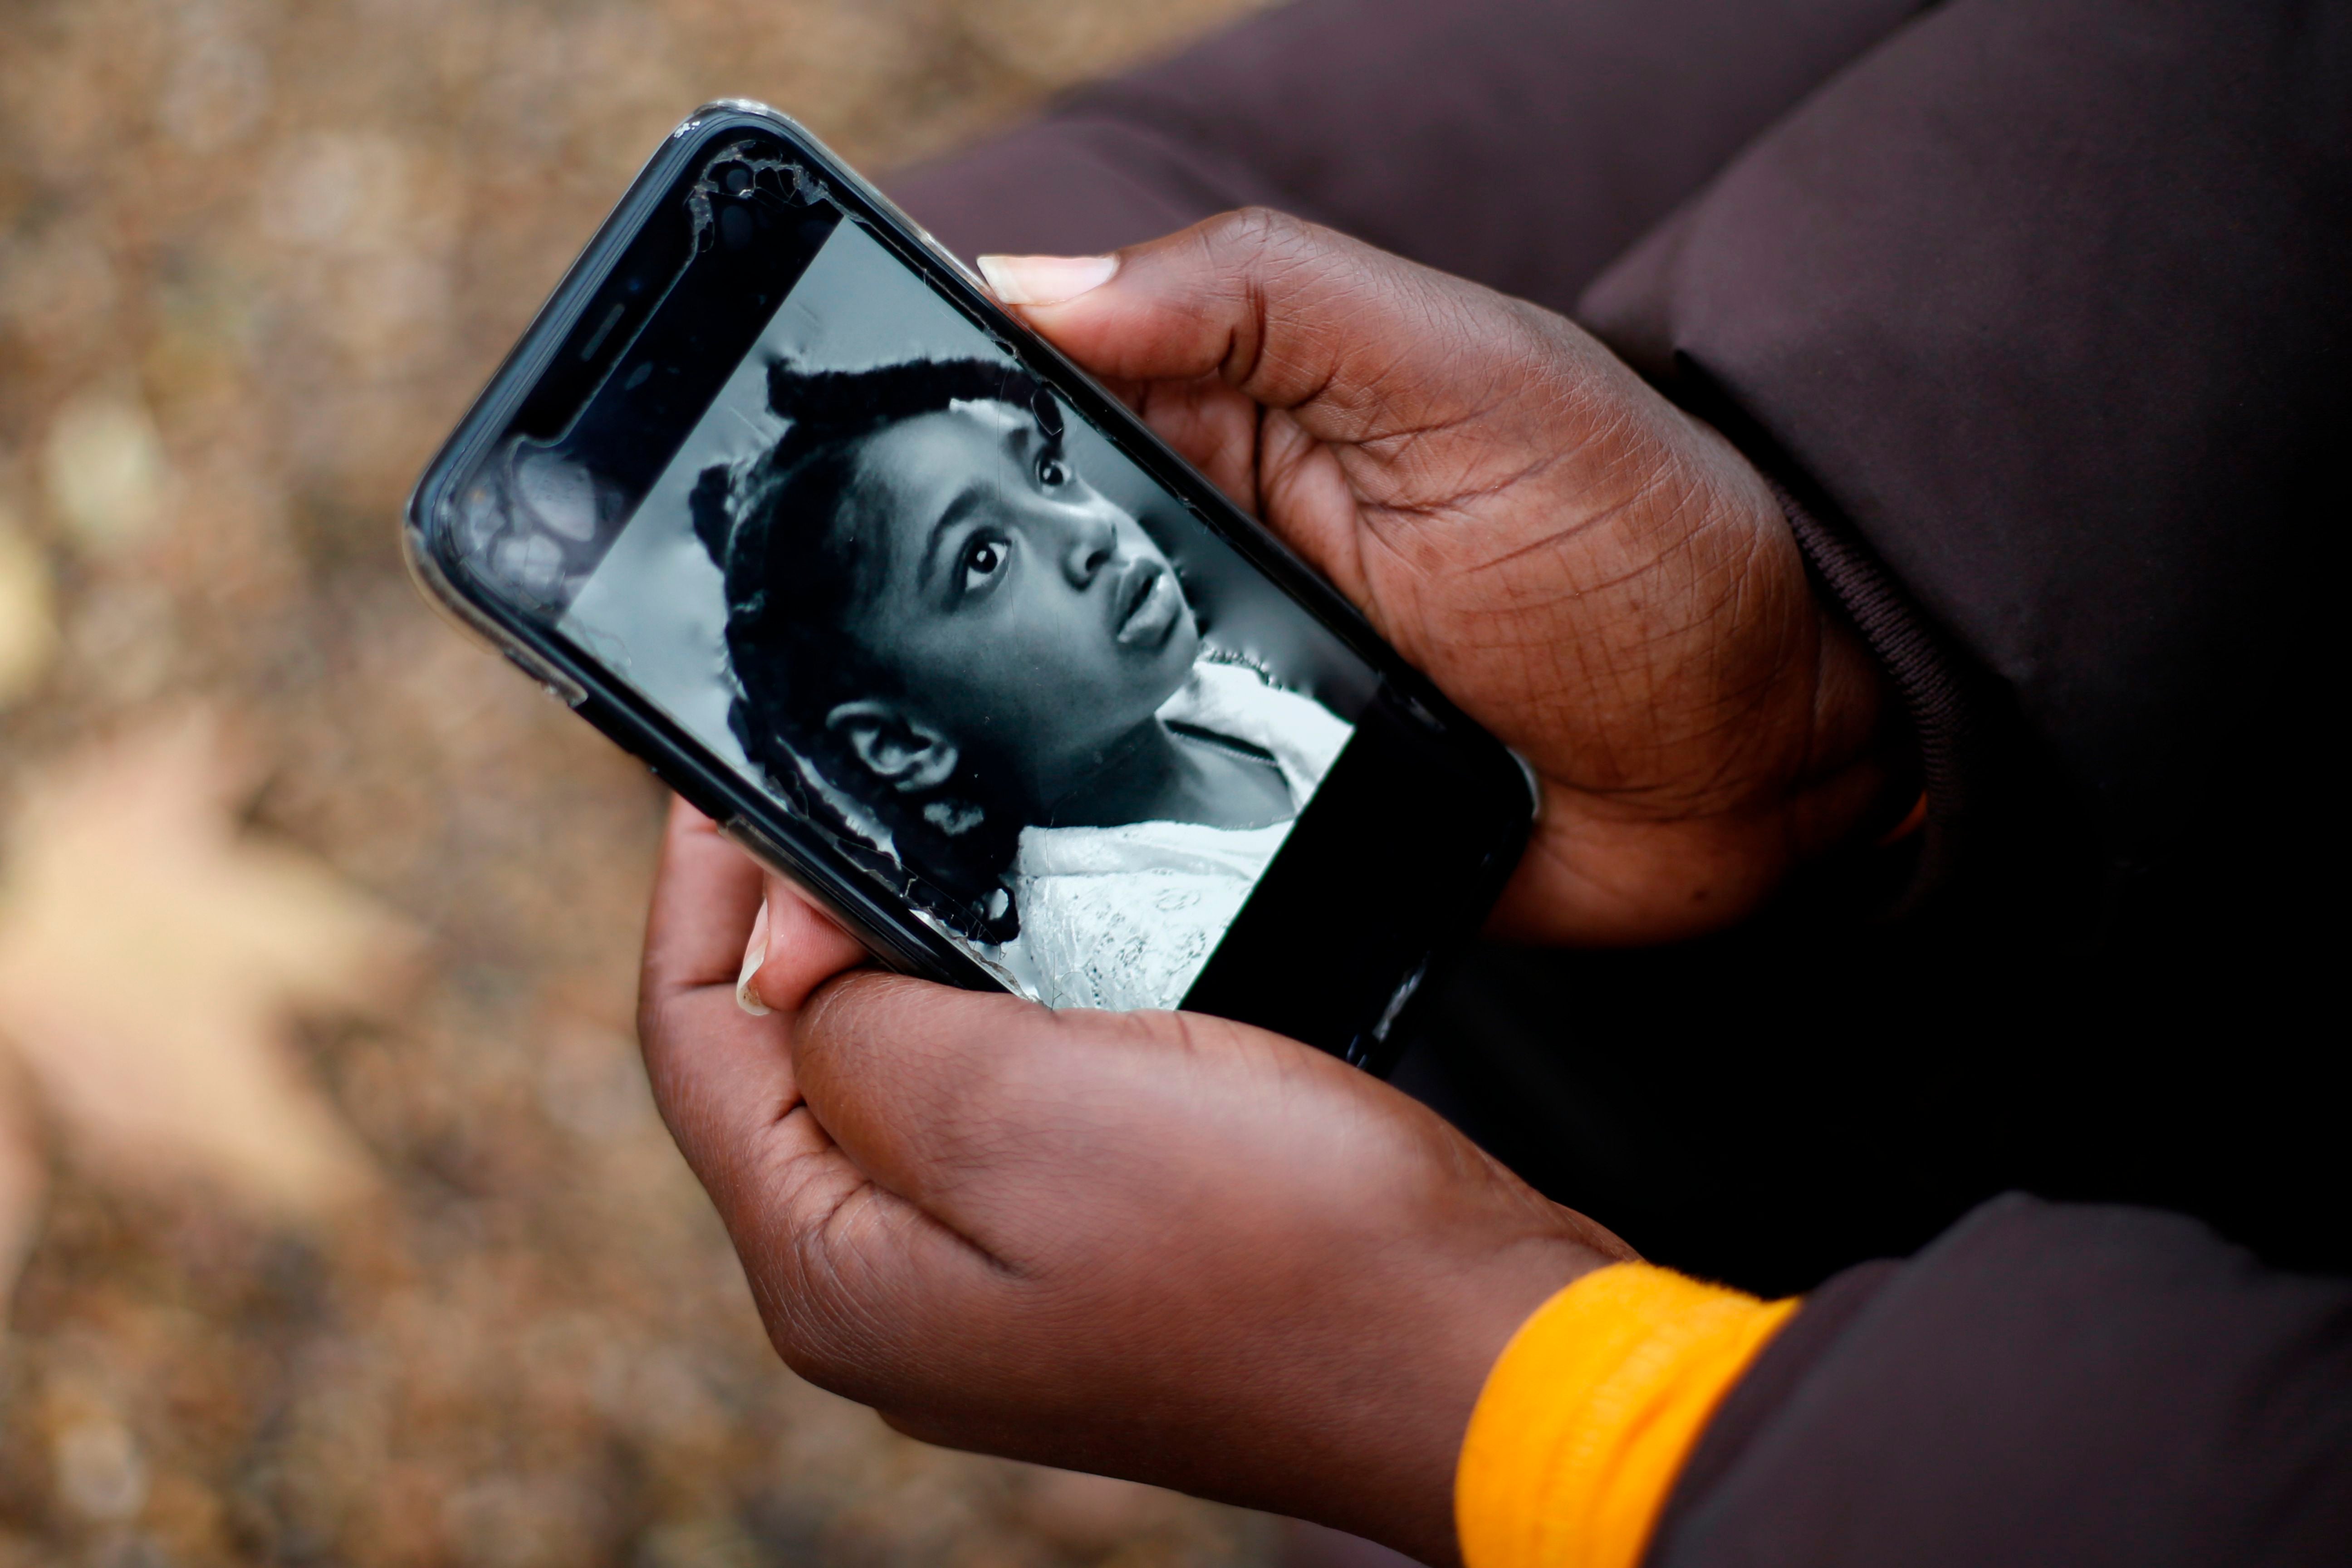 Rosamund Adoo-Kissi-Debrah holds her mobile phone displaying a photograph of her daughter Ella